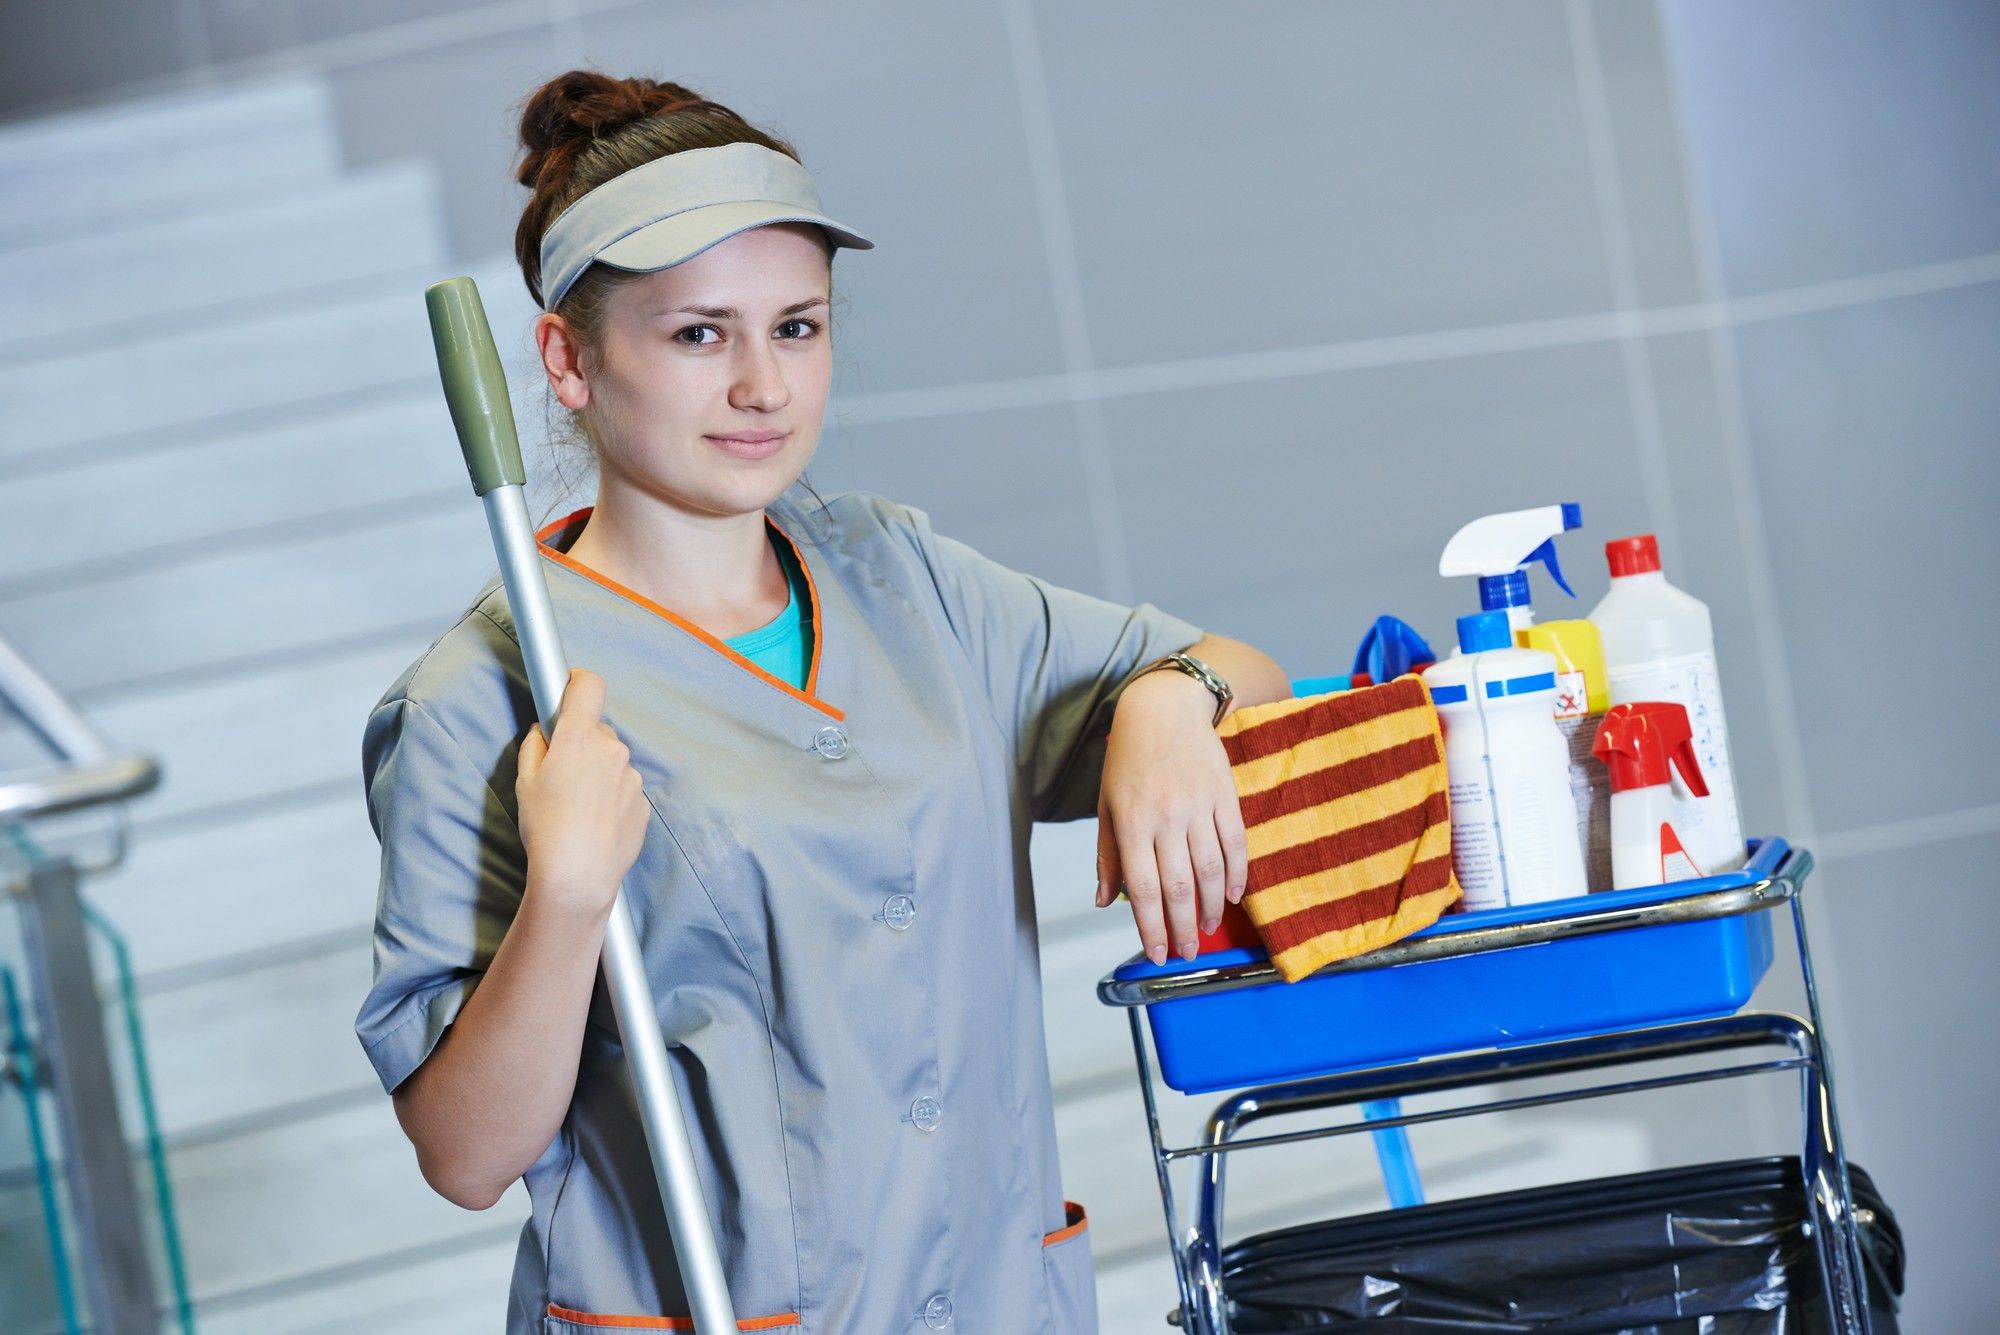 Hospital cleaning staffer with cart of chemicals